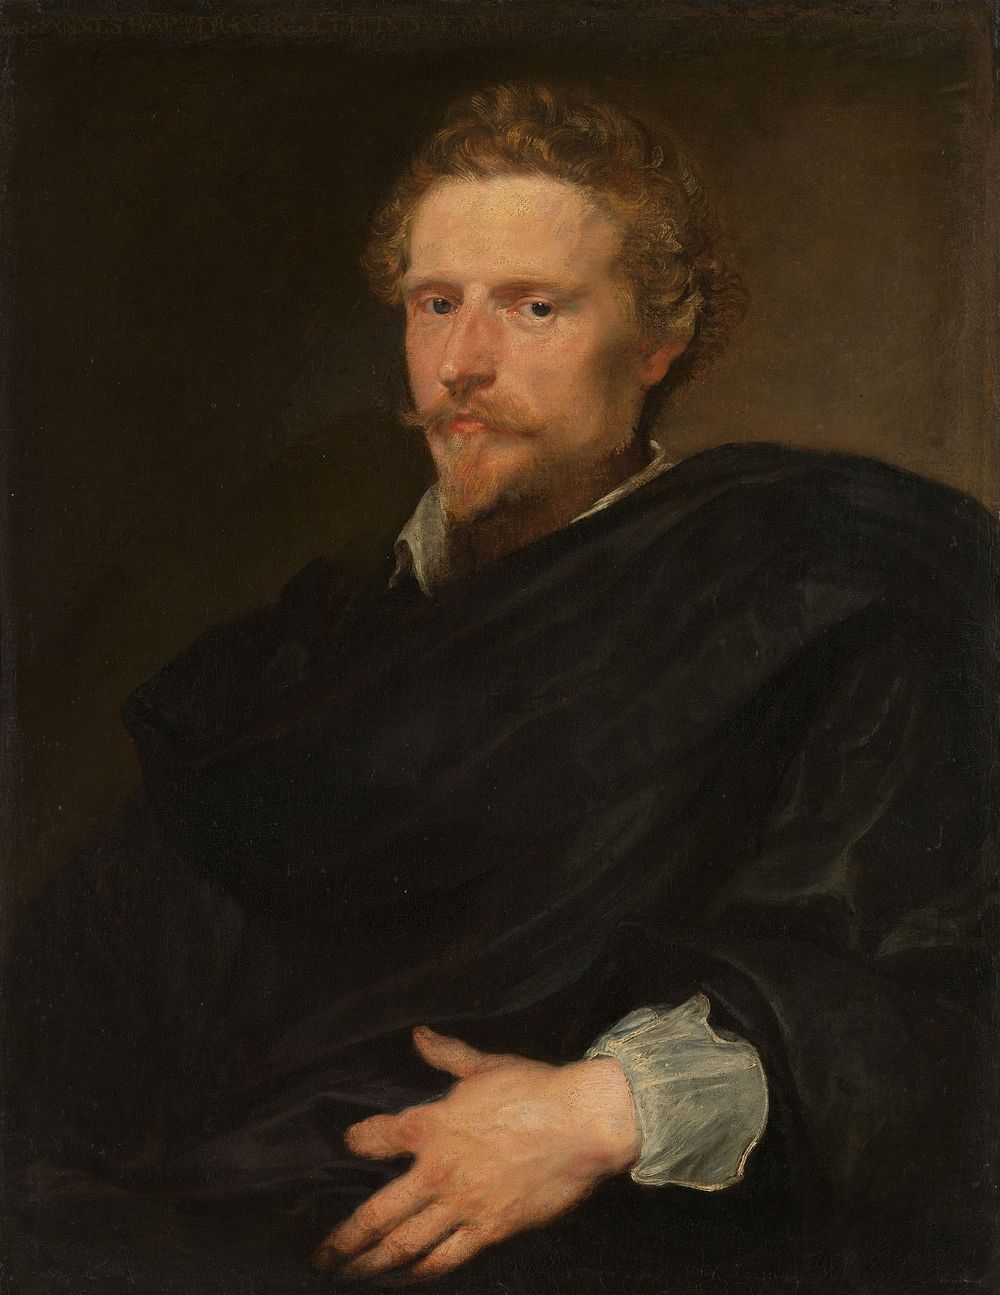 Portrait of a Man (c. 1620) by Anthony van Dyck